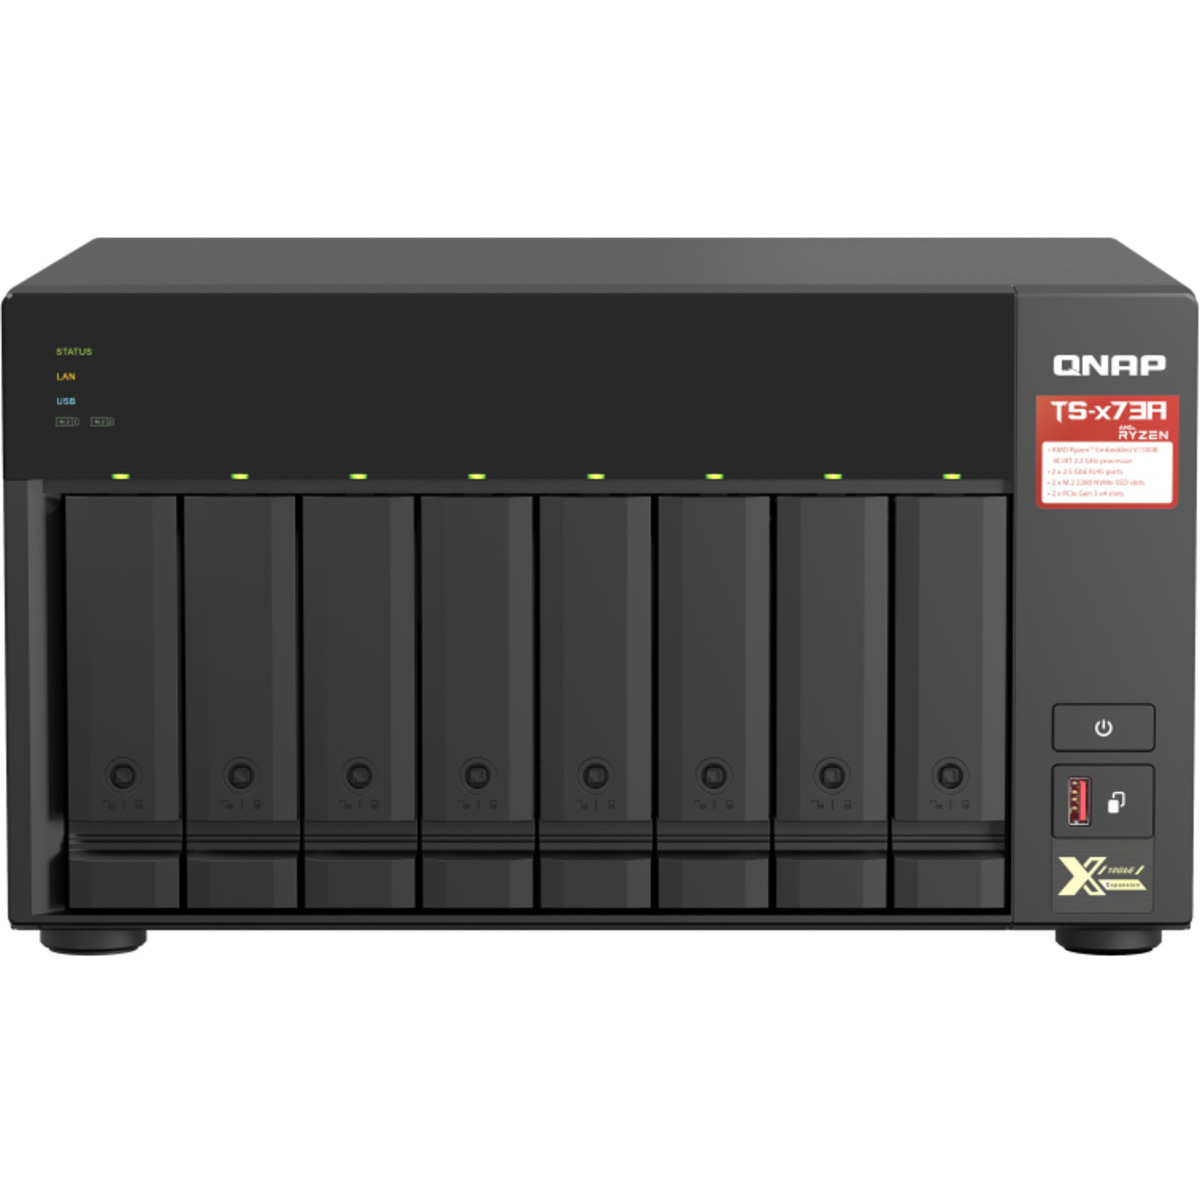 buy $3334 QNAP TS-873A 64tb Desktop NAS - Network Attached Storage Device 8x8000gb Toshiba Enterprise Capacity MG08ADA800E 3.5 7200rpm SATA 6Gb/s HDD ENTERPRISE Class Drives Installed - Burn-In Tested - ON SALE - nas headquarters buy network attached storage server device das new raid-5 free shipping usa christmas new year holiday sale TS-873A